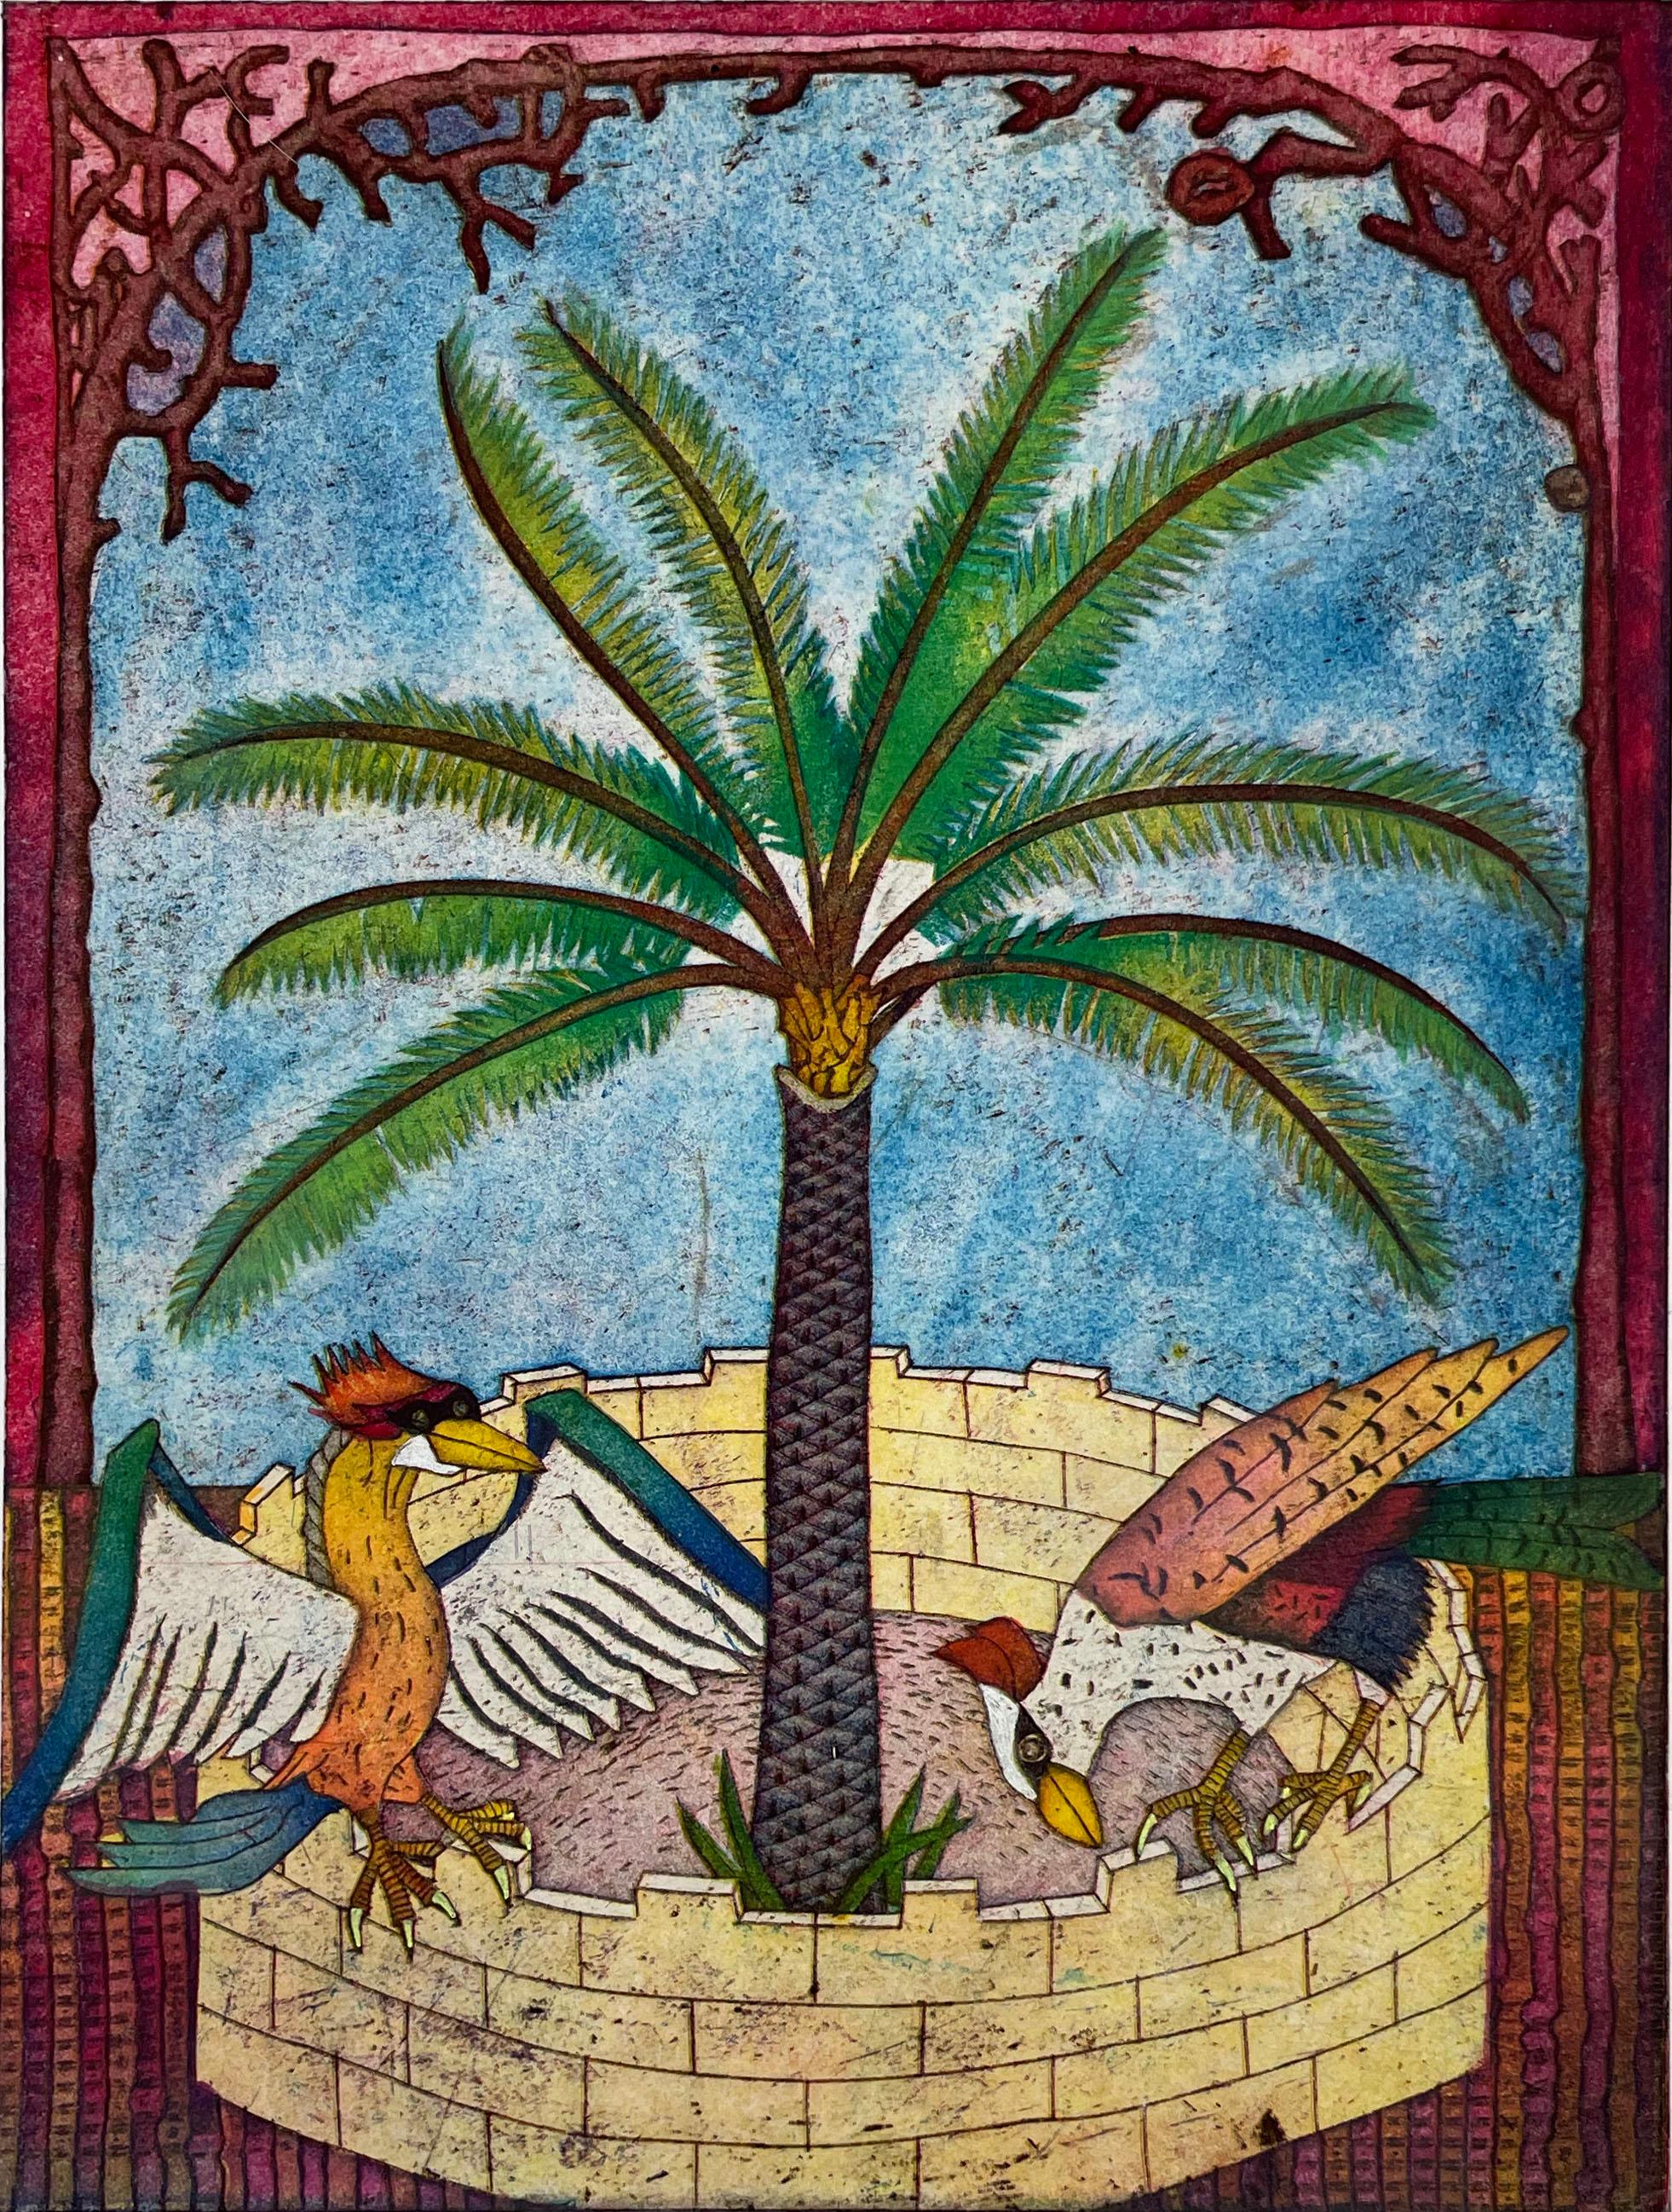 Signed and numbered from the edition of 15. Printed on Chine colle. Image of two happy birds finding a meal under a palm tree. 

Yuji Hiratsuka was born 1954 in Osaka, Japan. In 1985 he moved to the United States to pursue graduate degrees in